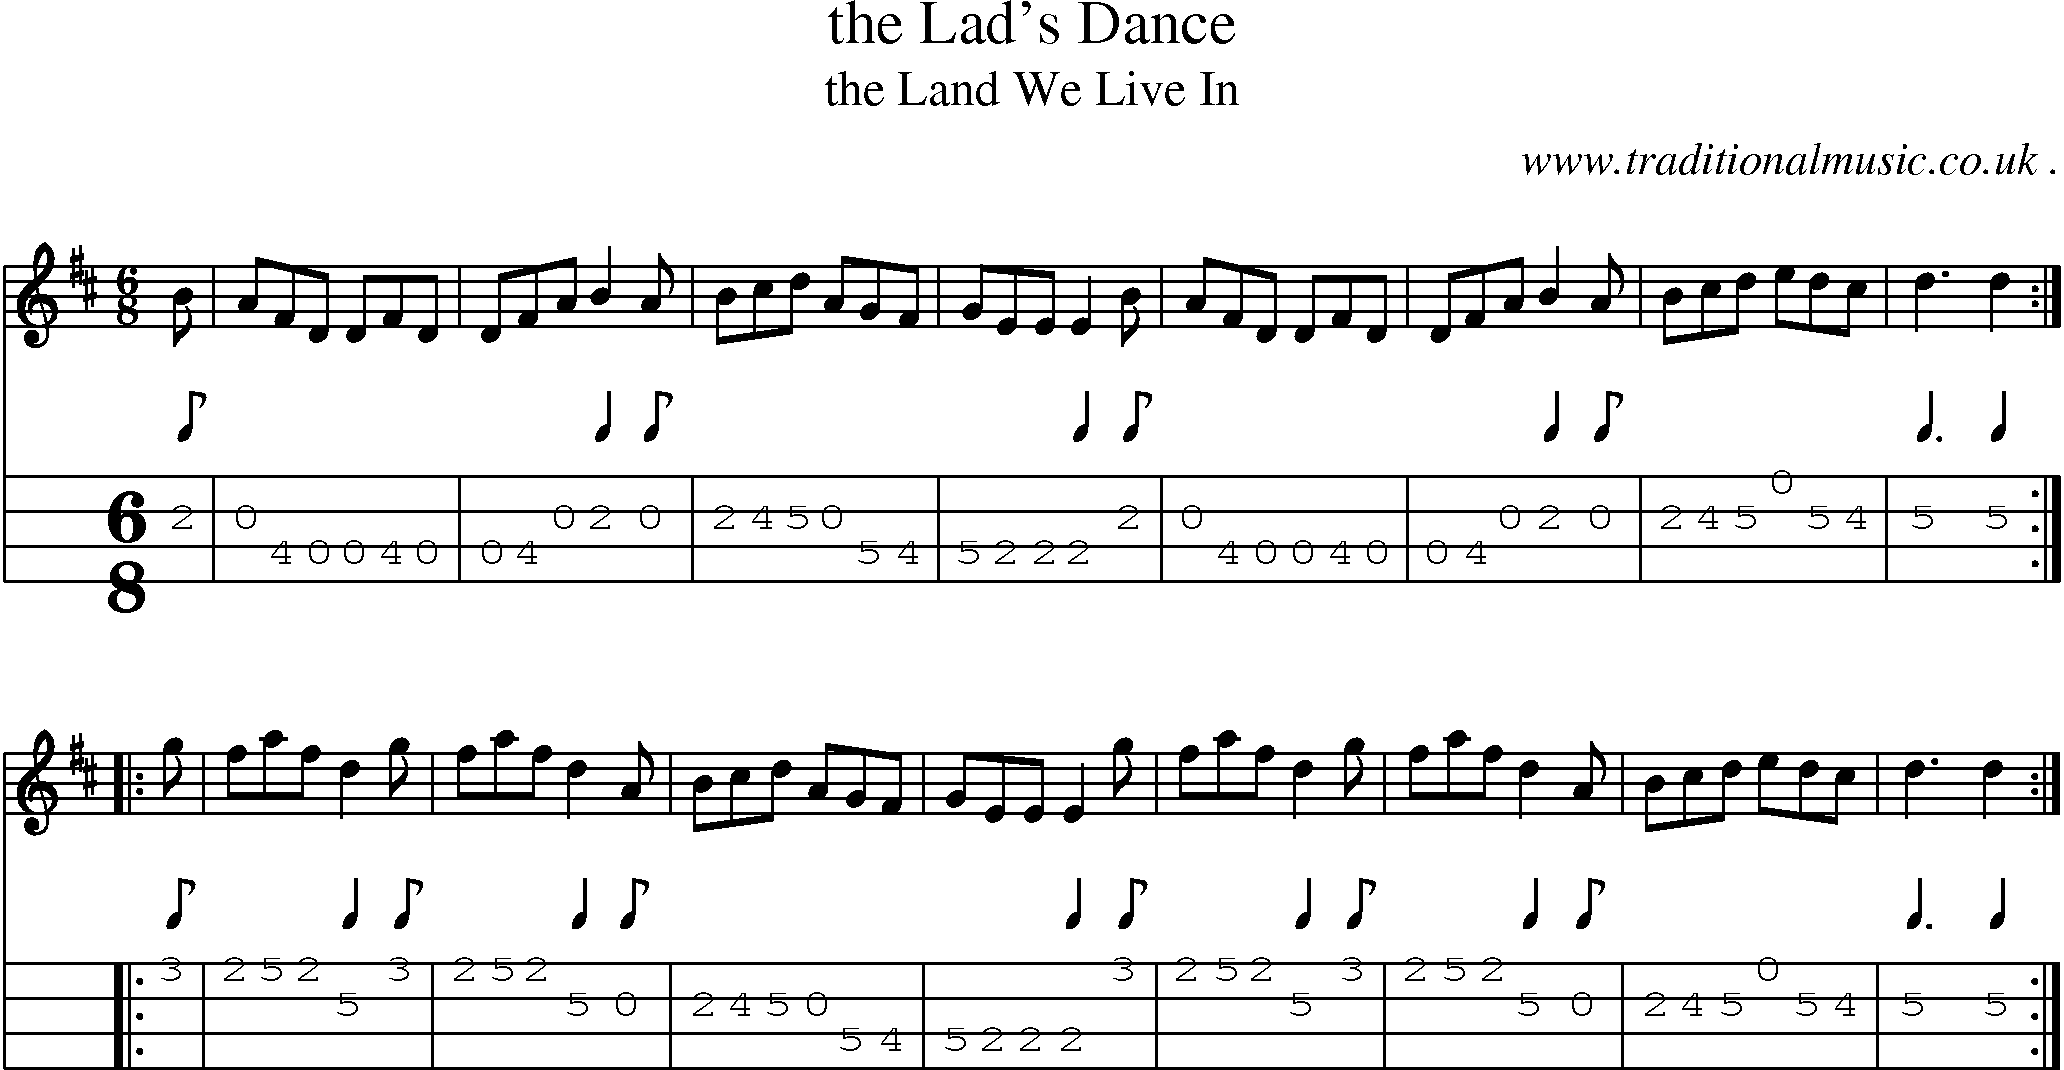 Sheet-music  score, Chords and Mandolin Tabs for The Lads Dance